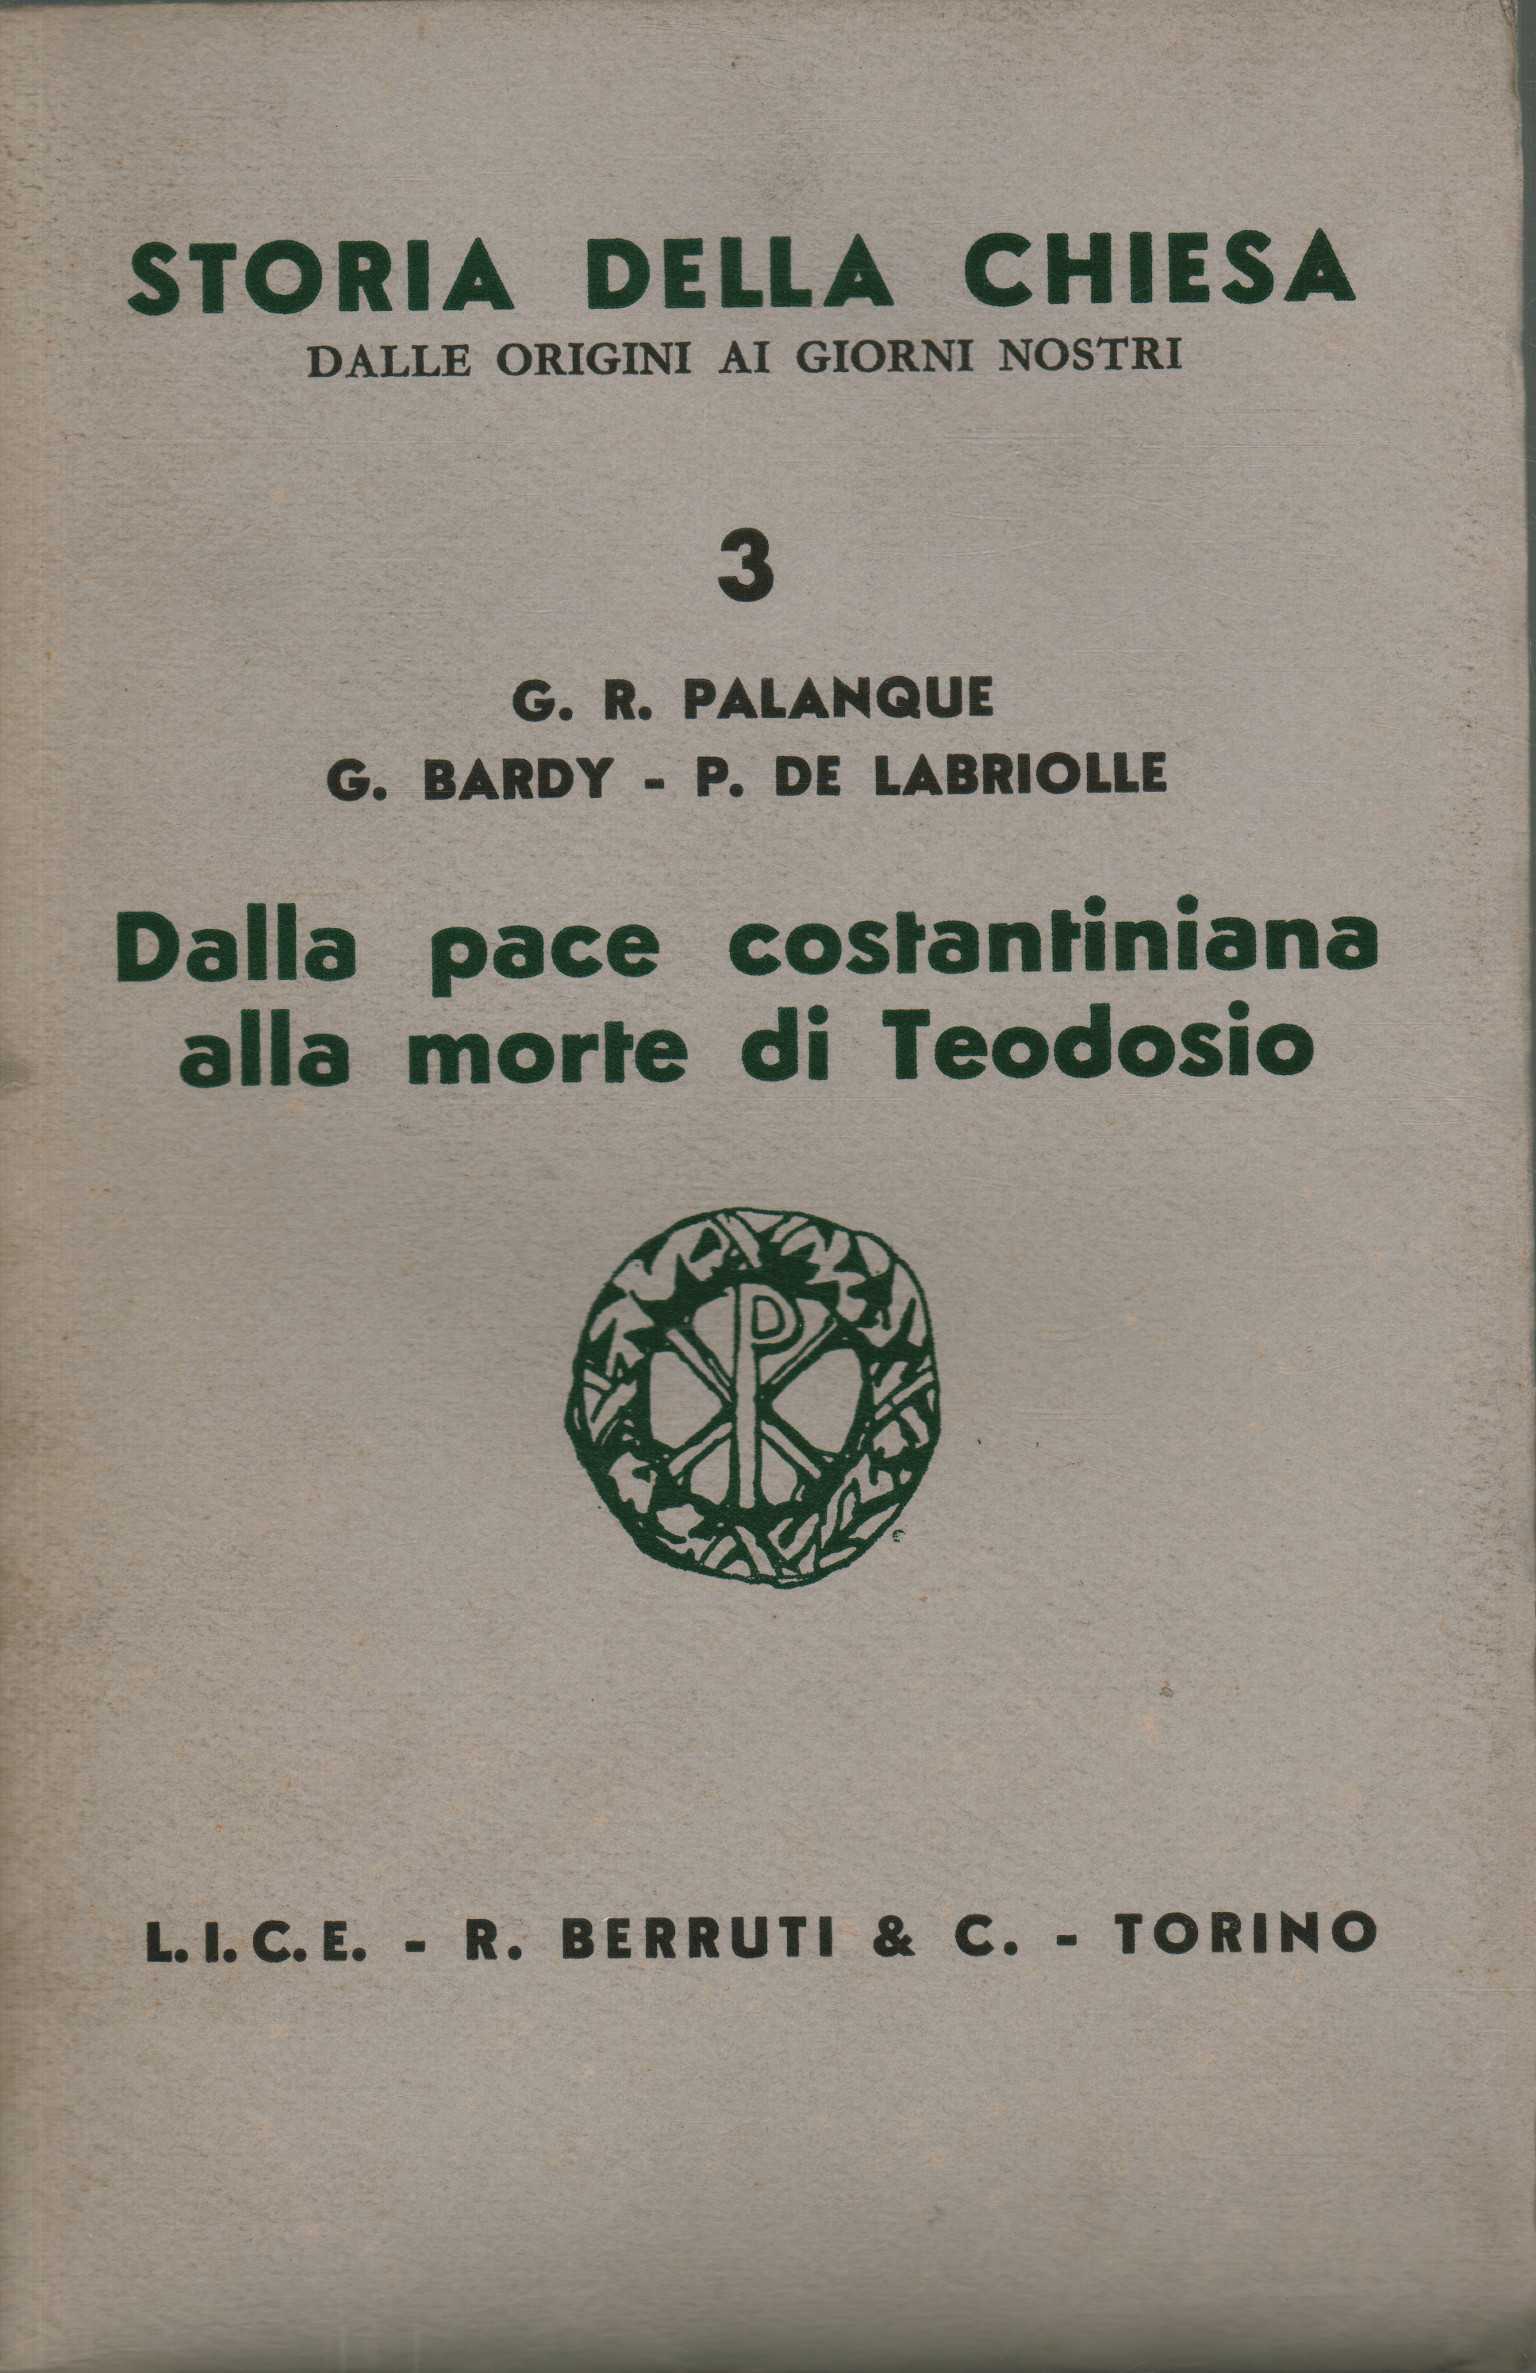 From the Constantinian peace to the death of Theodosius, G.R. Palanque G. Bardy P. De Labriolle